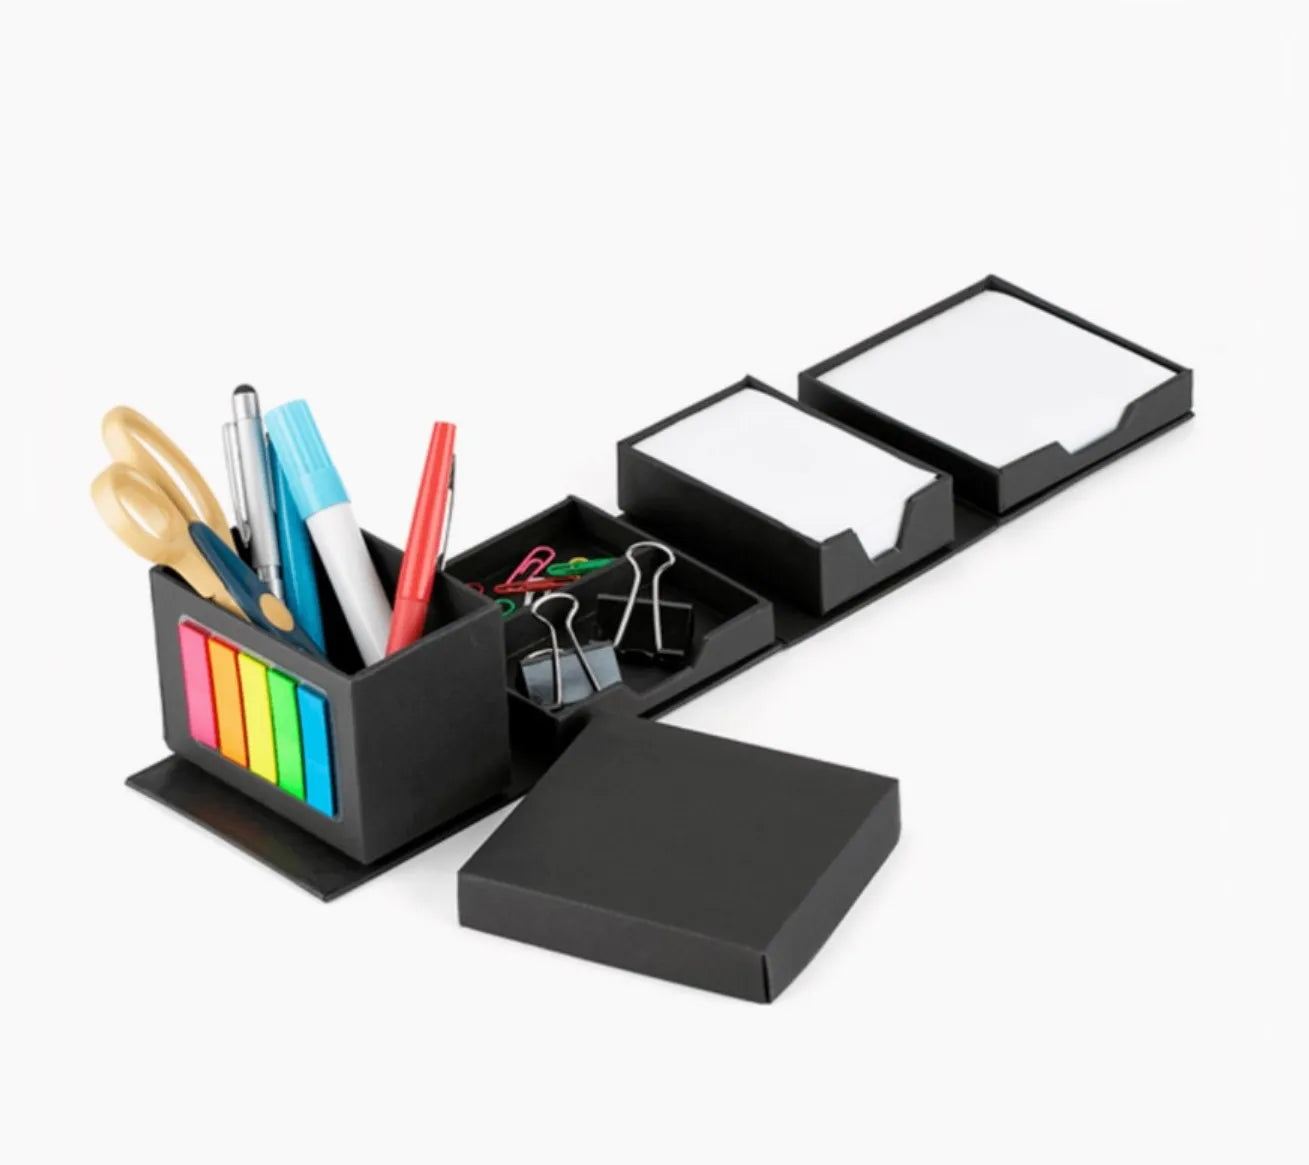 Folding Desk Caddy Organizer Cube – With Sticky Notes, Paperclips